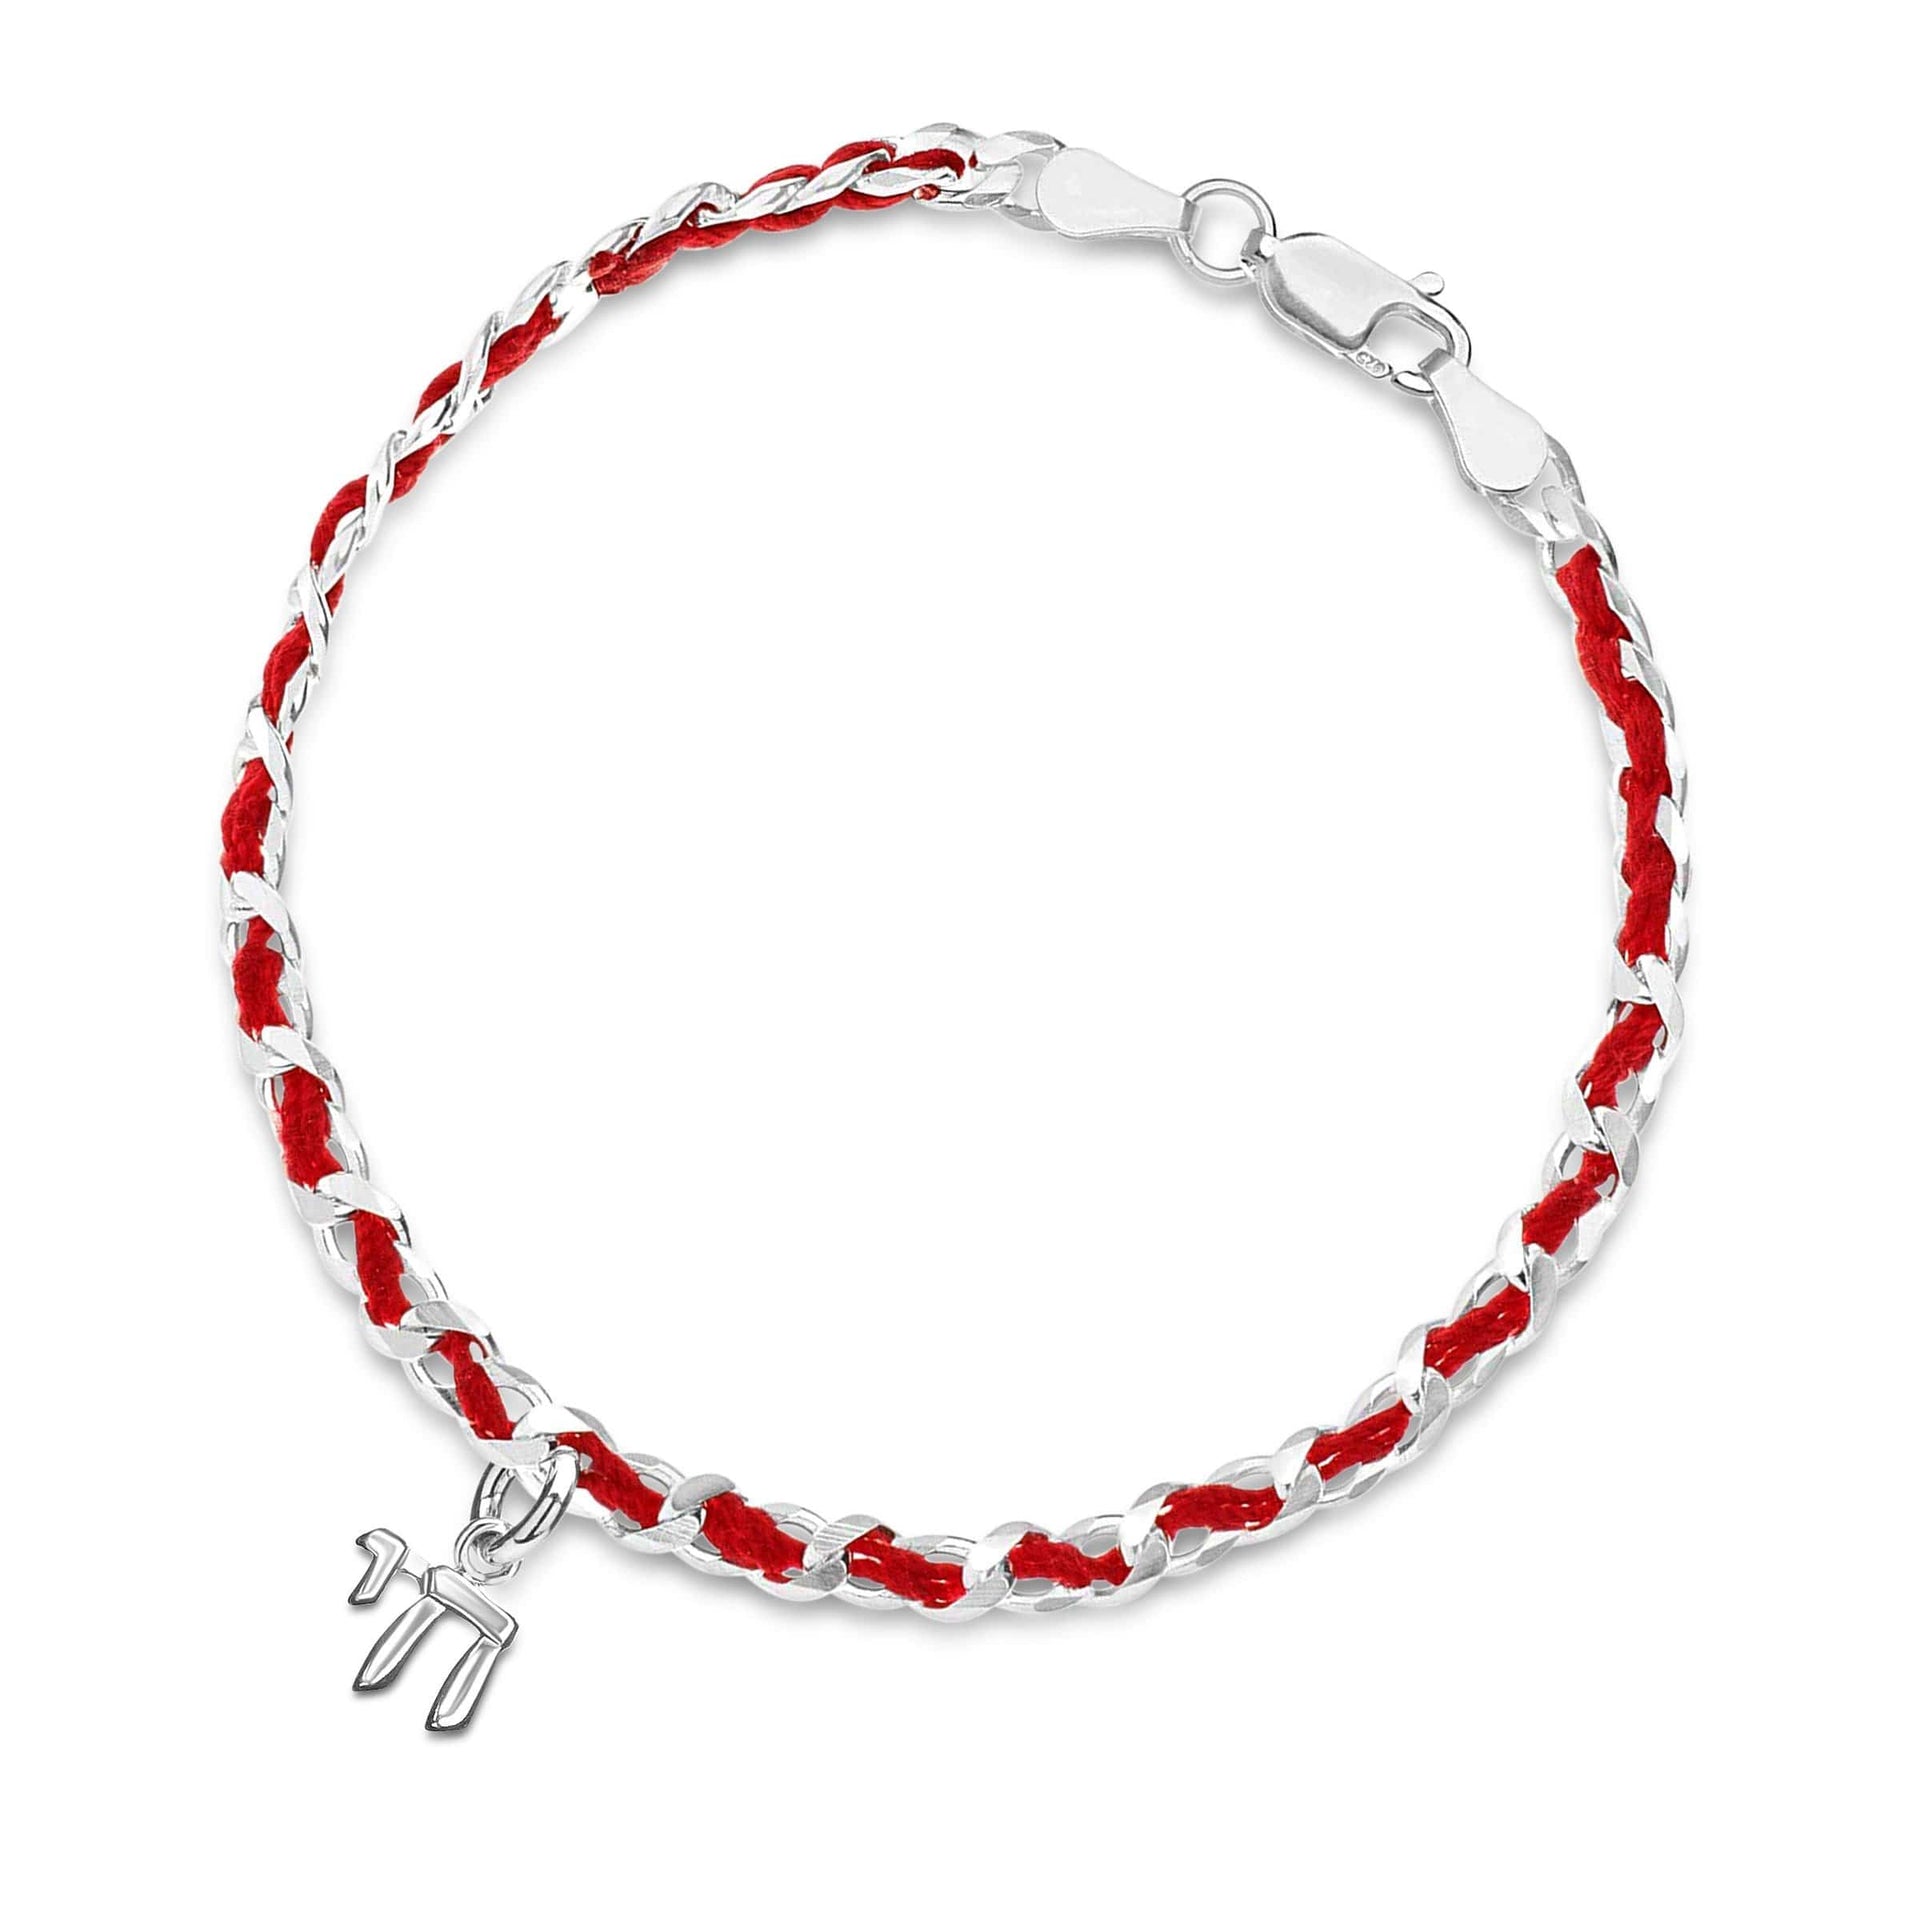 Alef Bet Bracelets 7 inches (standard) / Red and Silver Red Cord Bendel Bracelet with Chai Charm